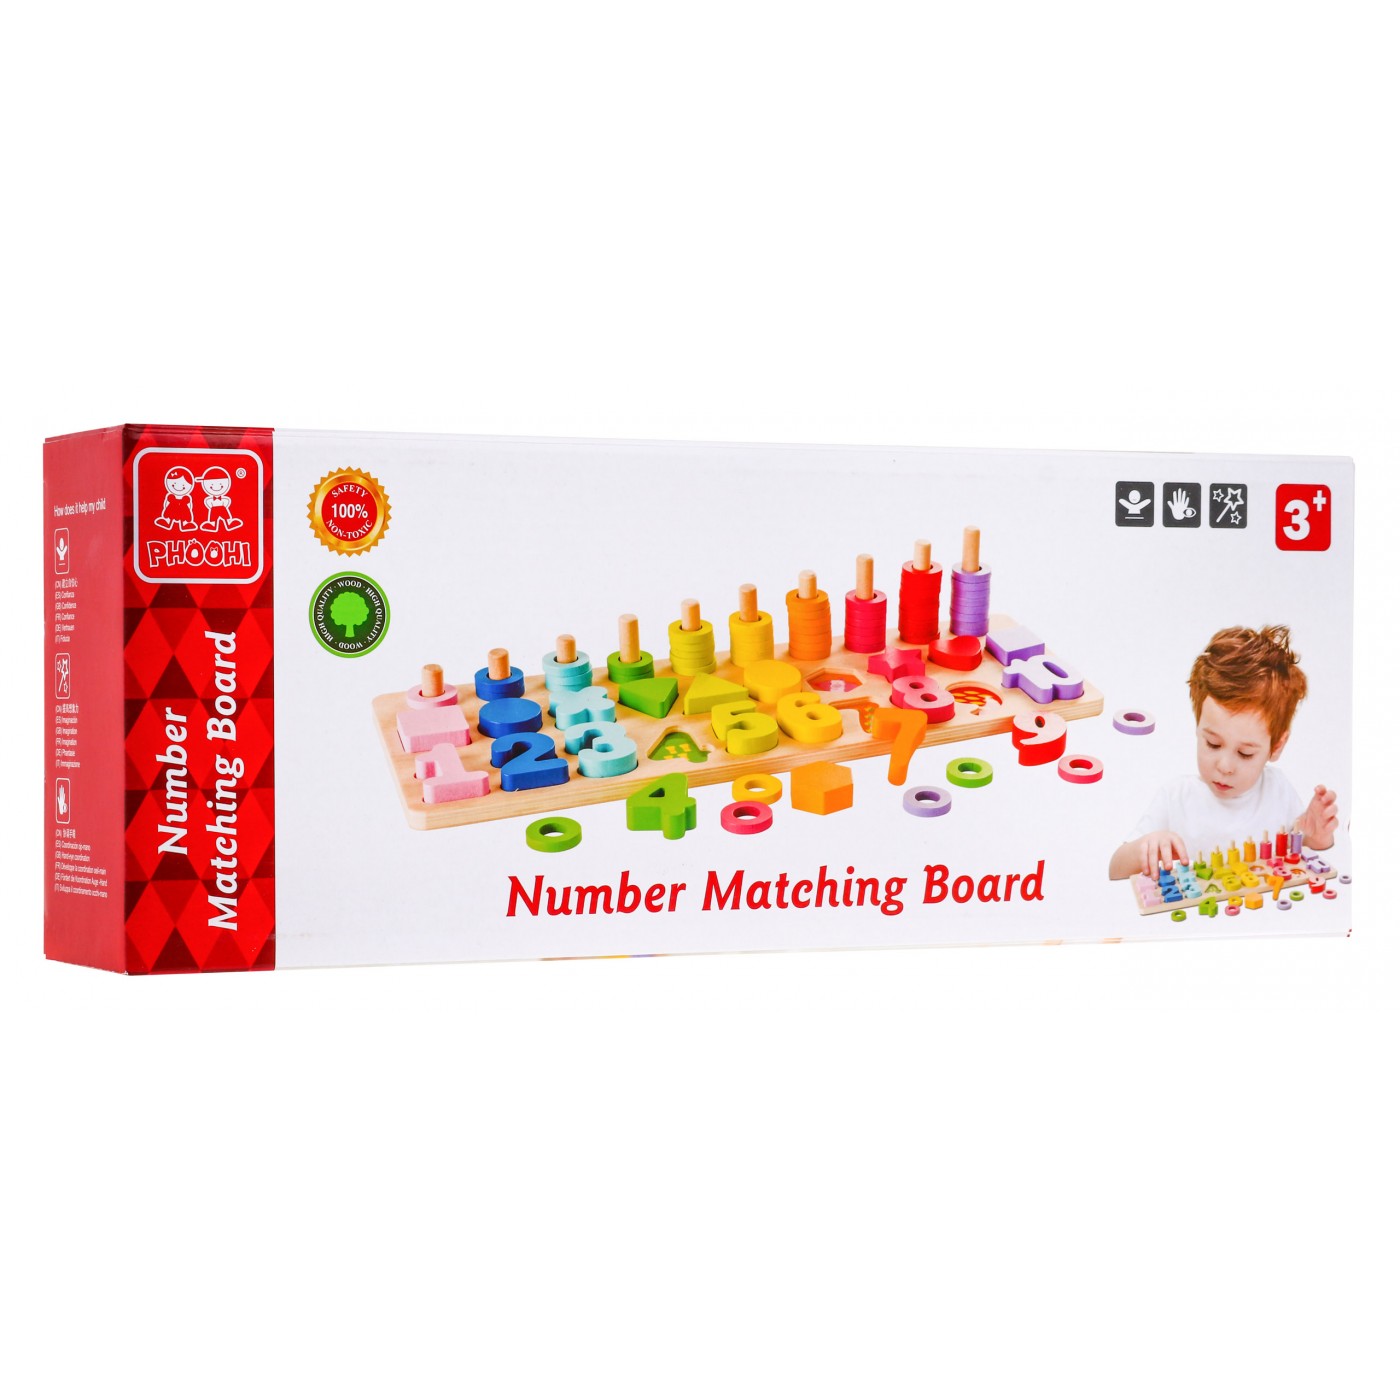 Wooden set of games for learning